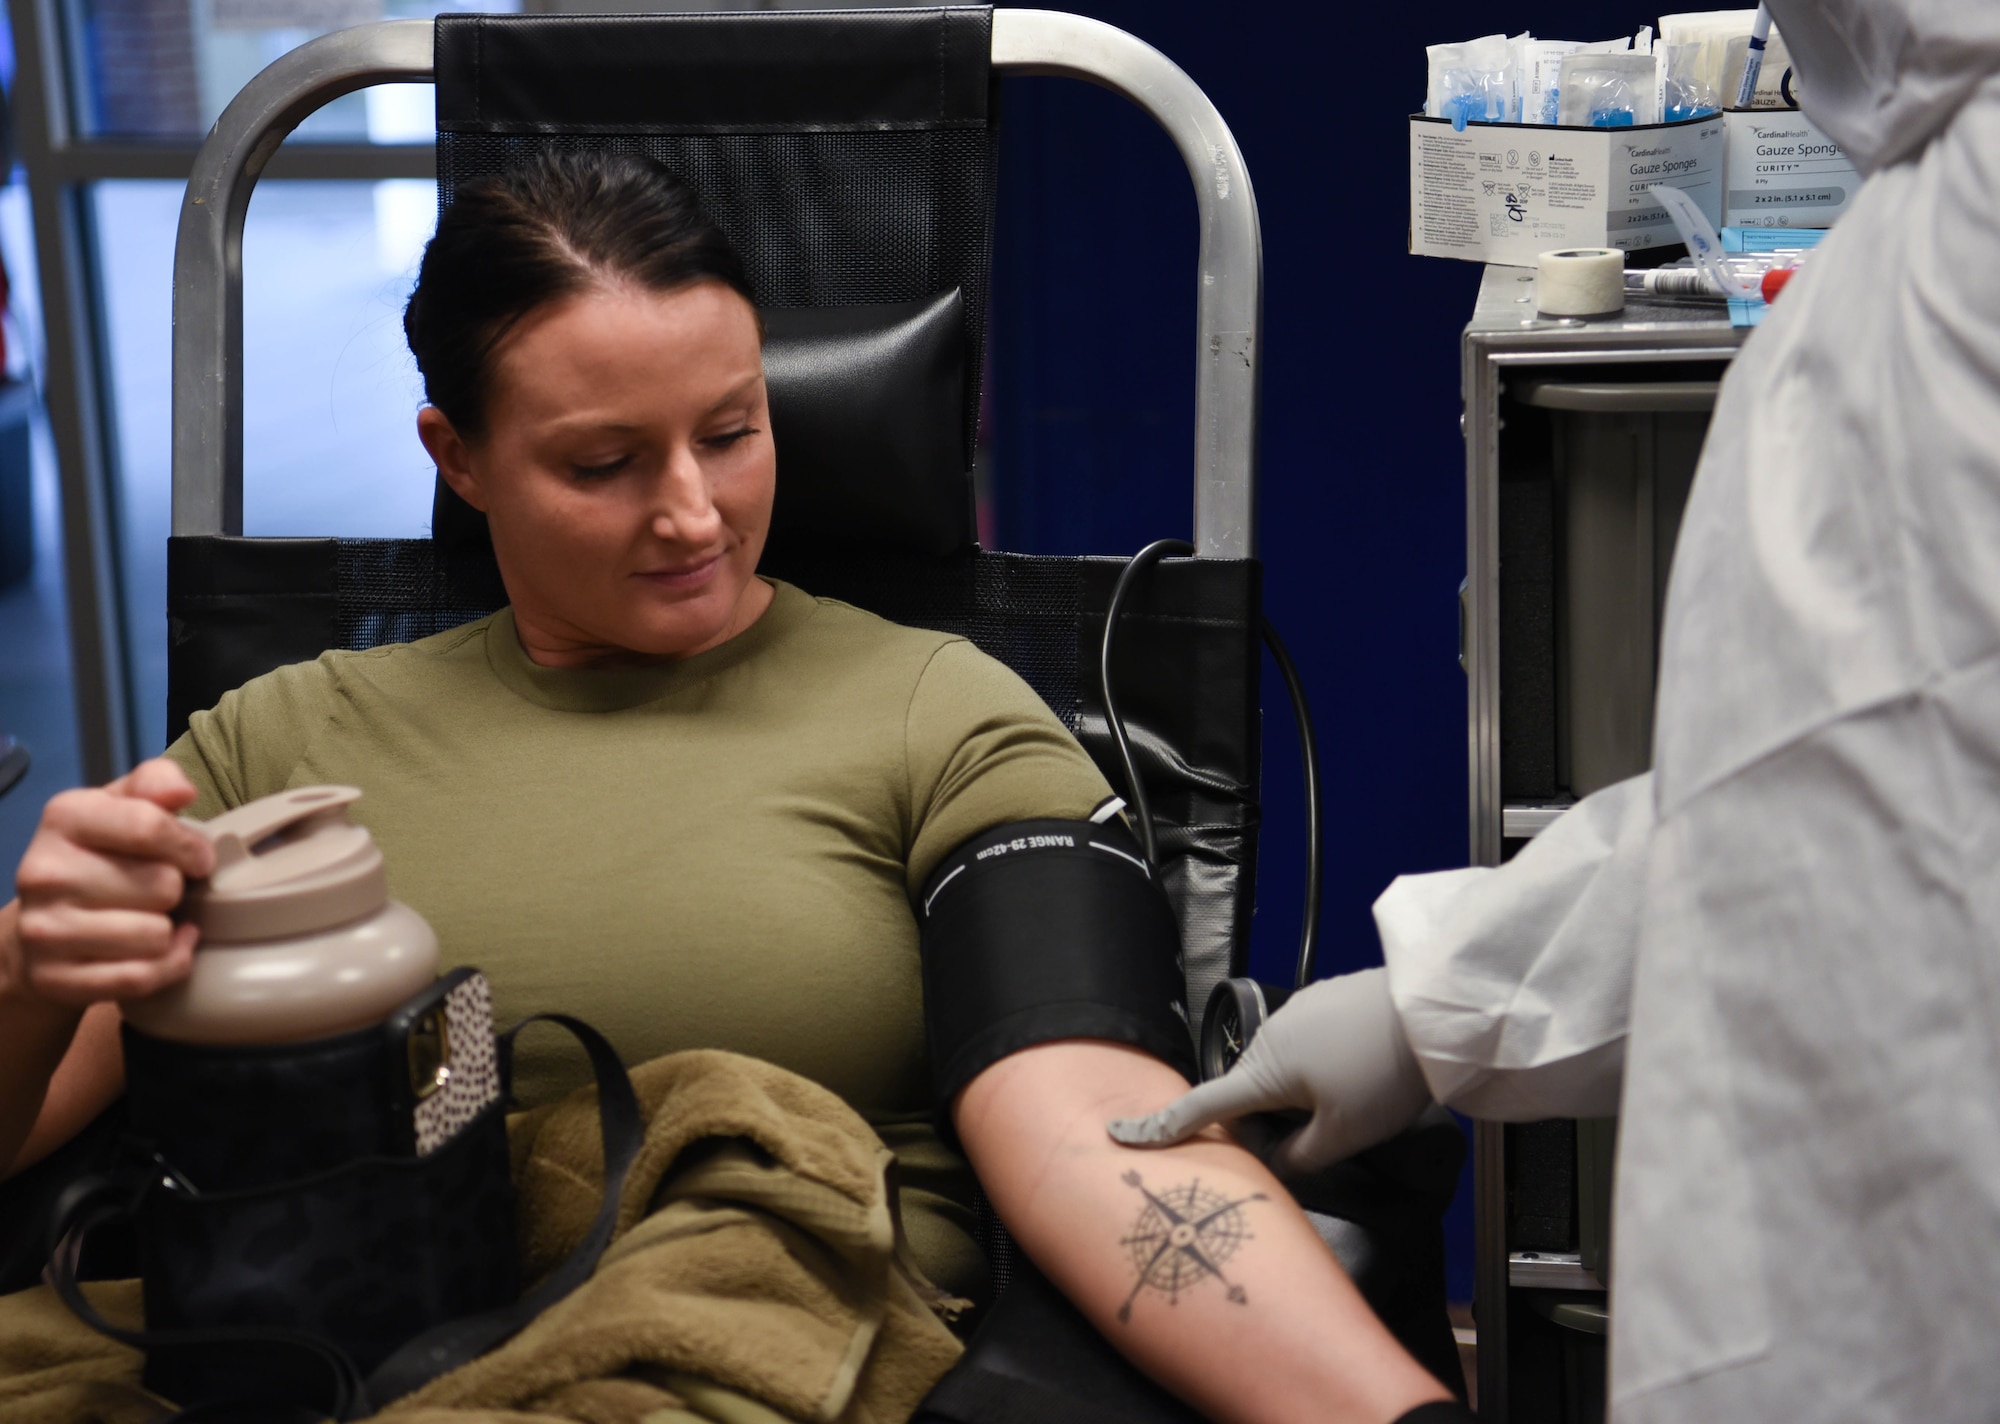 U.S. Air National Guard Member Tech. Sgt. Samantha McKinney allows a phlebotomist to assess her arm for a blood drive conducted by the 88th Medical Group for a base wide blood drive on April 5, 2024 in Springfield, Ohio. The 178th Wing participates in The Armed Services Blood Program which provides quality blood products for service members, veterans and their families in both peace and war. (U.S. Air National Guard photo by Airman 1st Class Josh Kaeser)